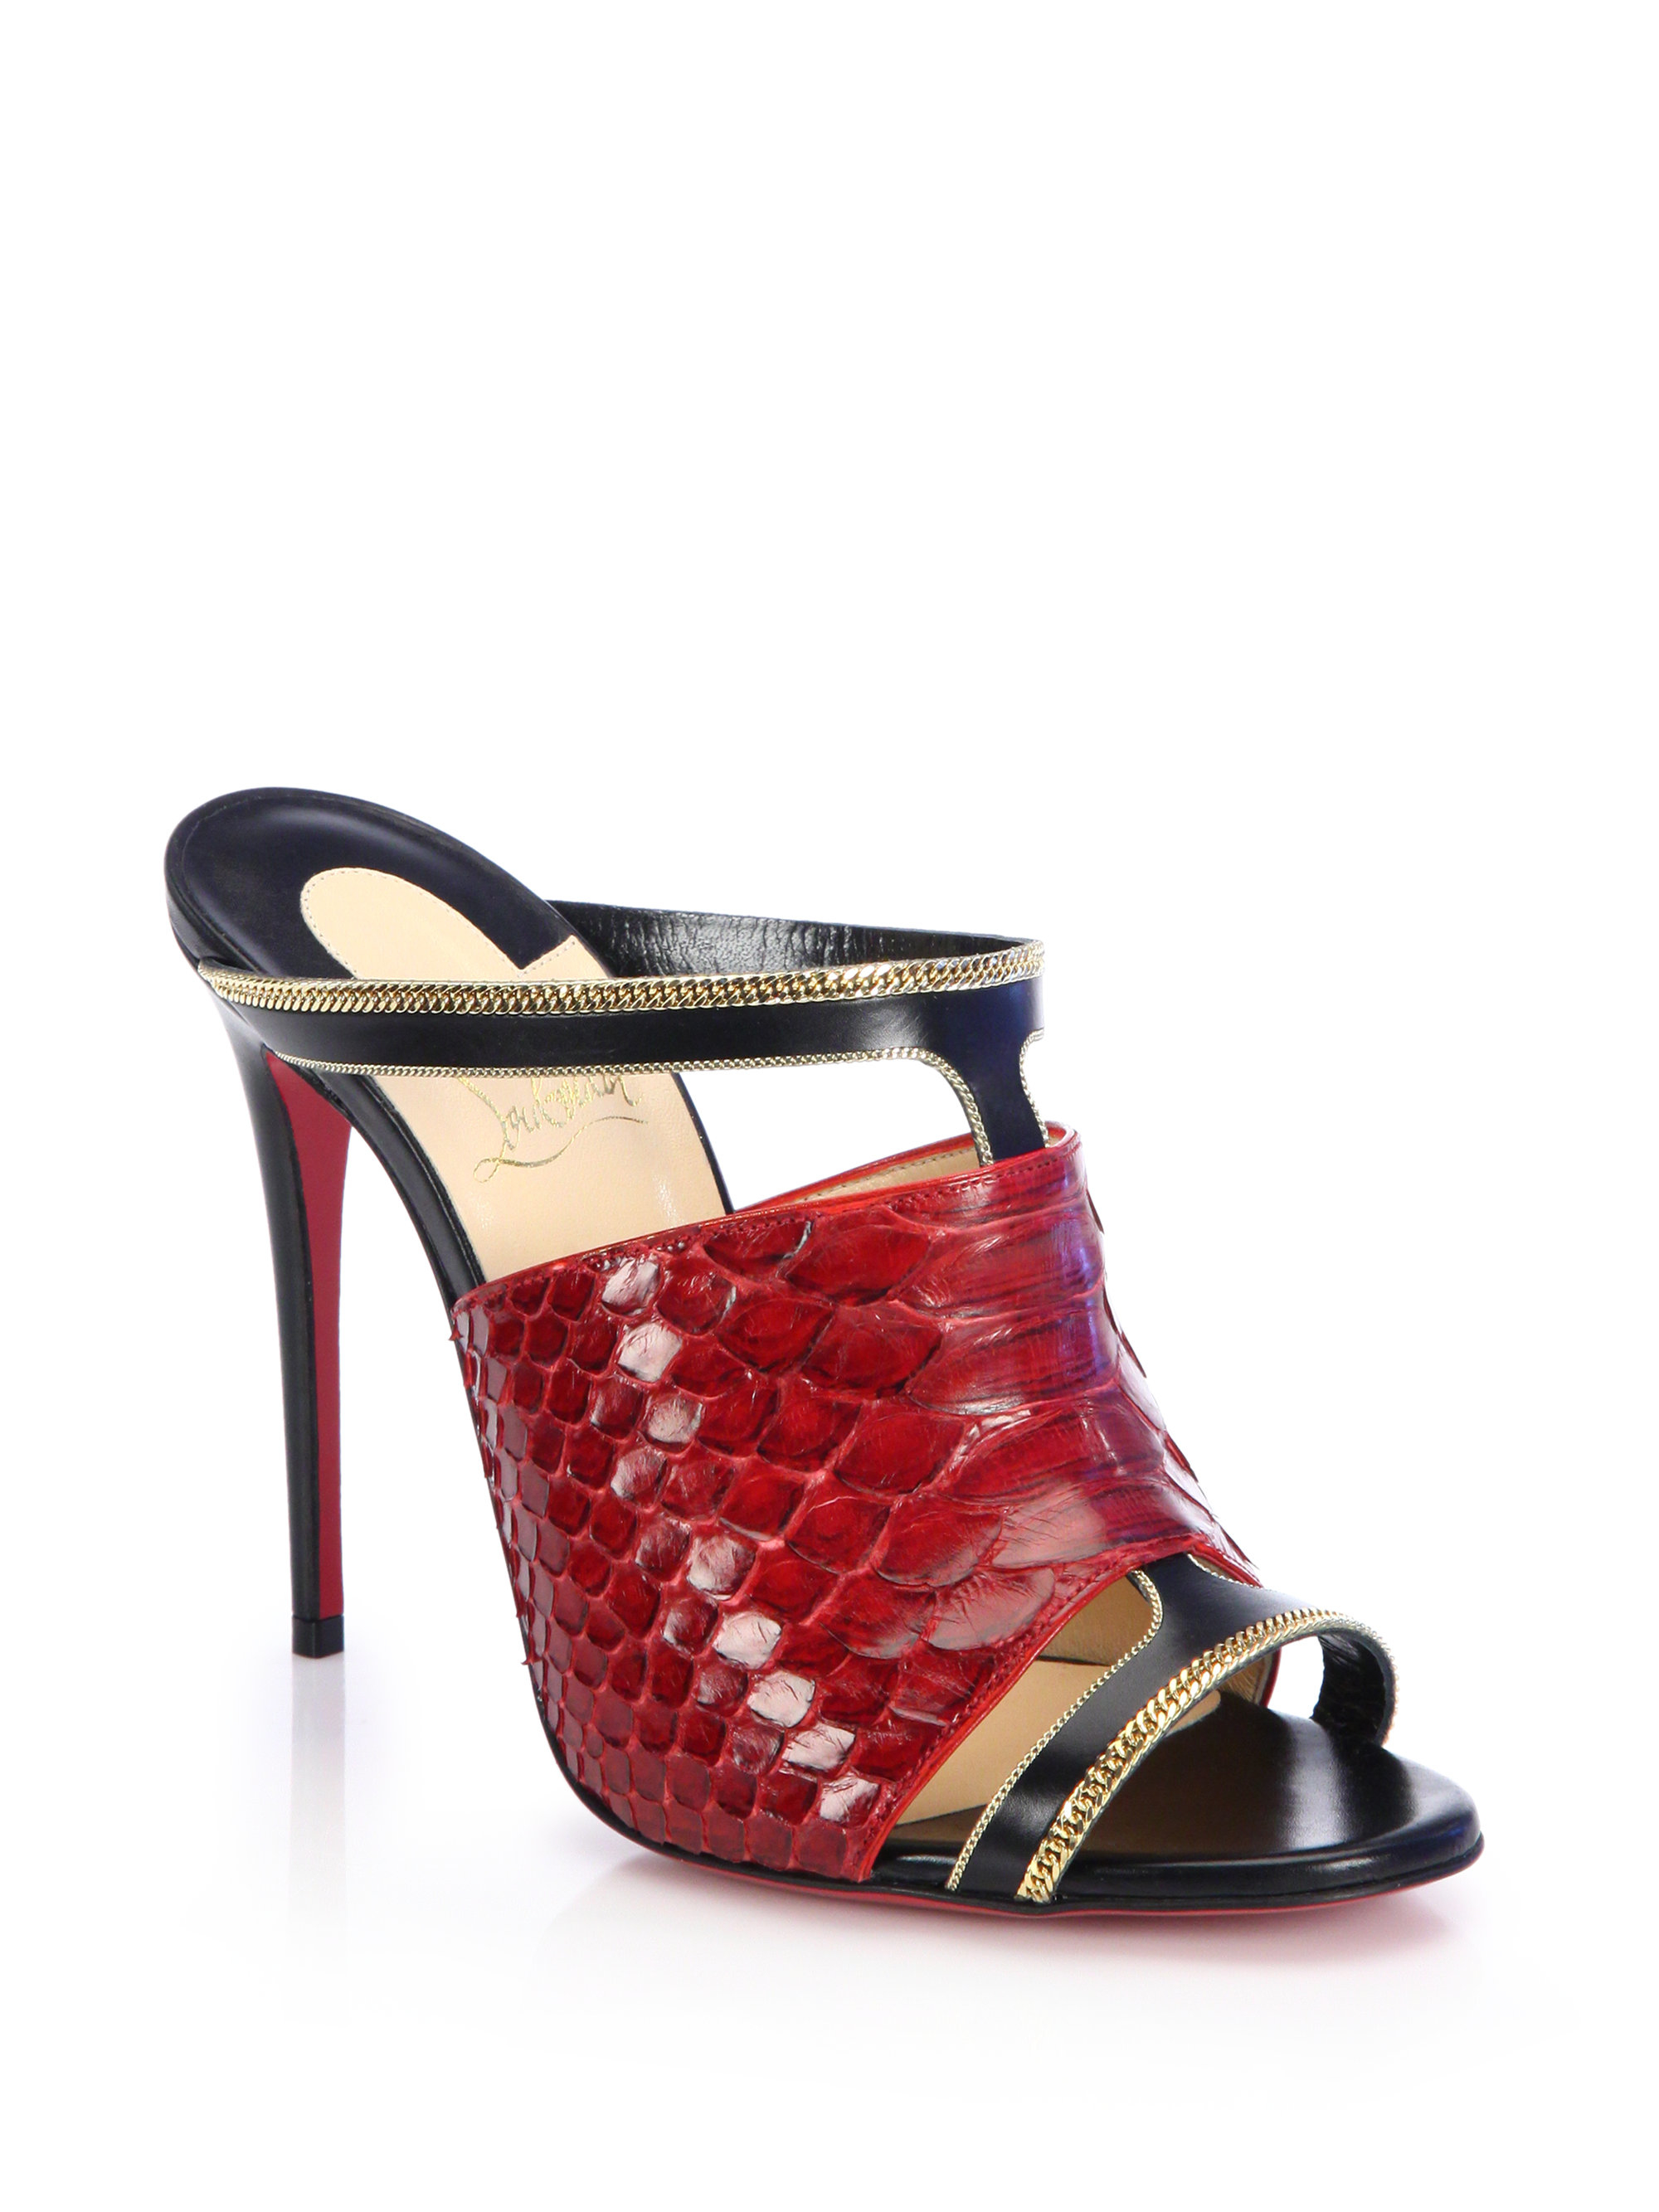 christian louboutin red sandals